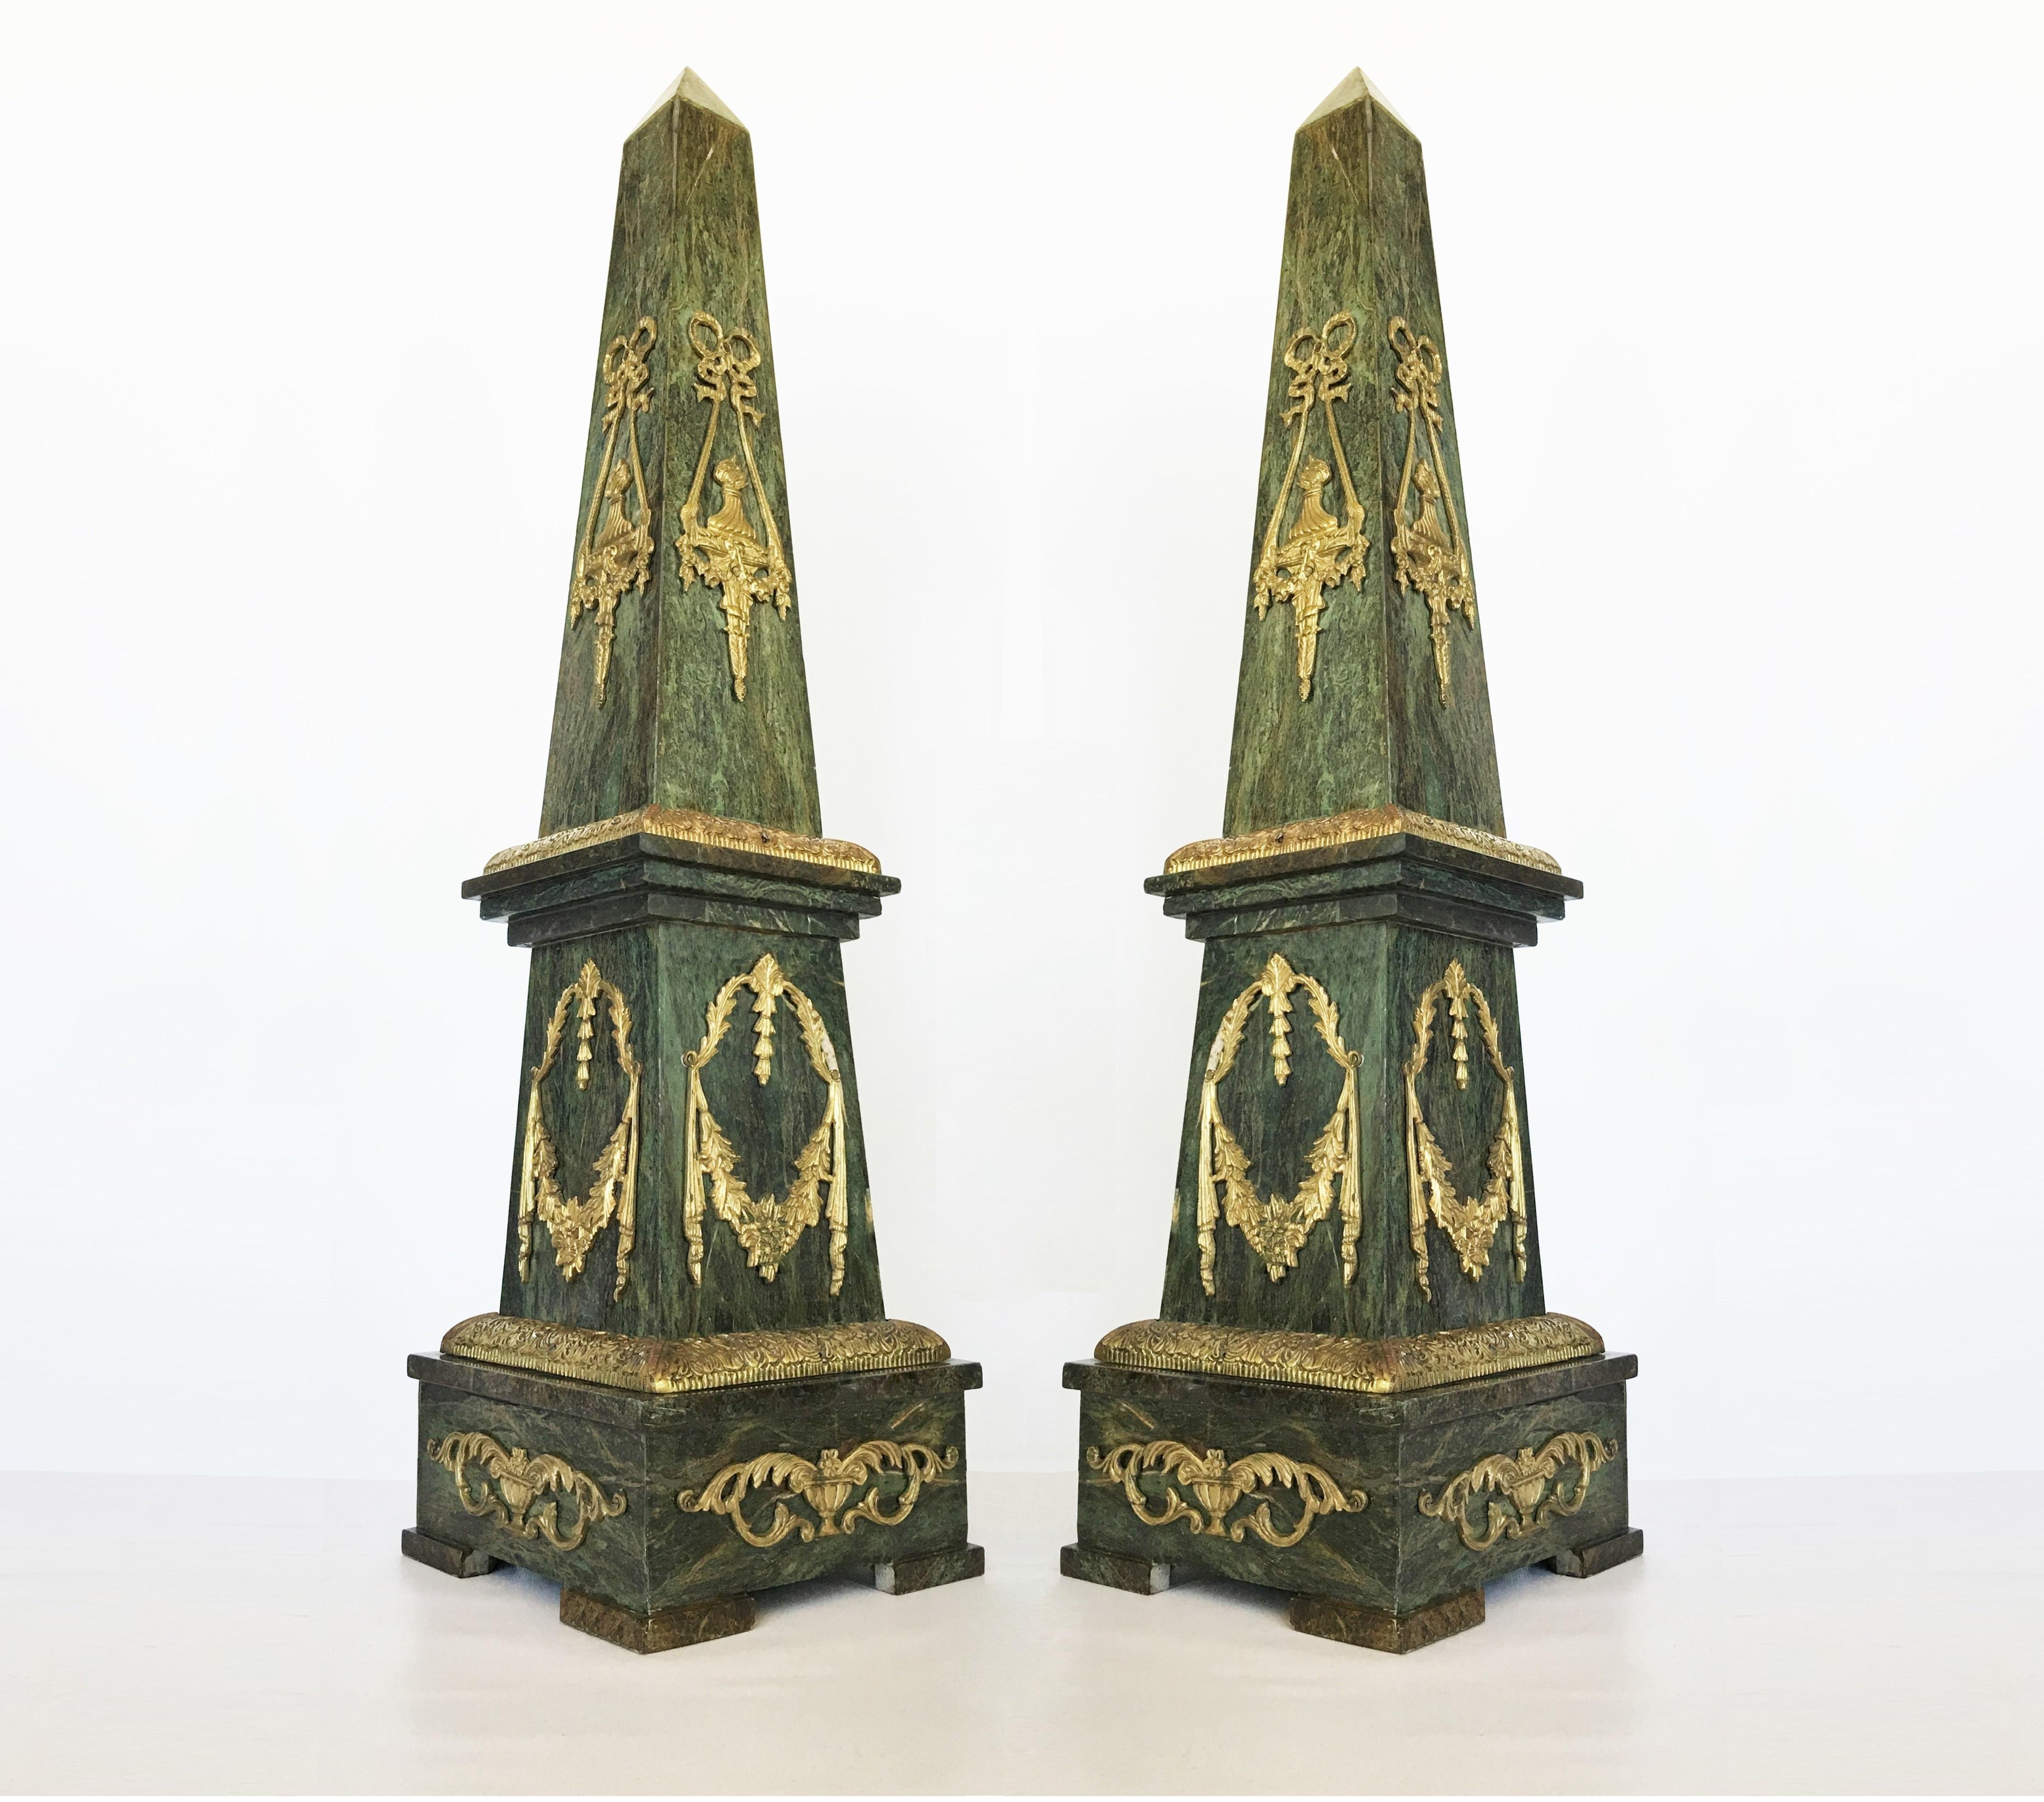 Pair of large marble obelisks. Made from solid Verde Antico marble with bronze neoclassical style decorative mounts on all four sides.